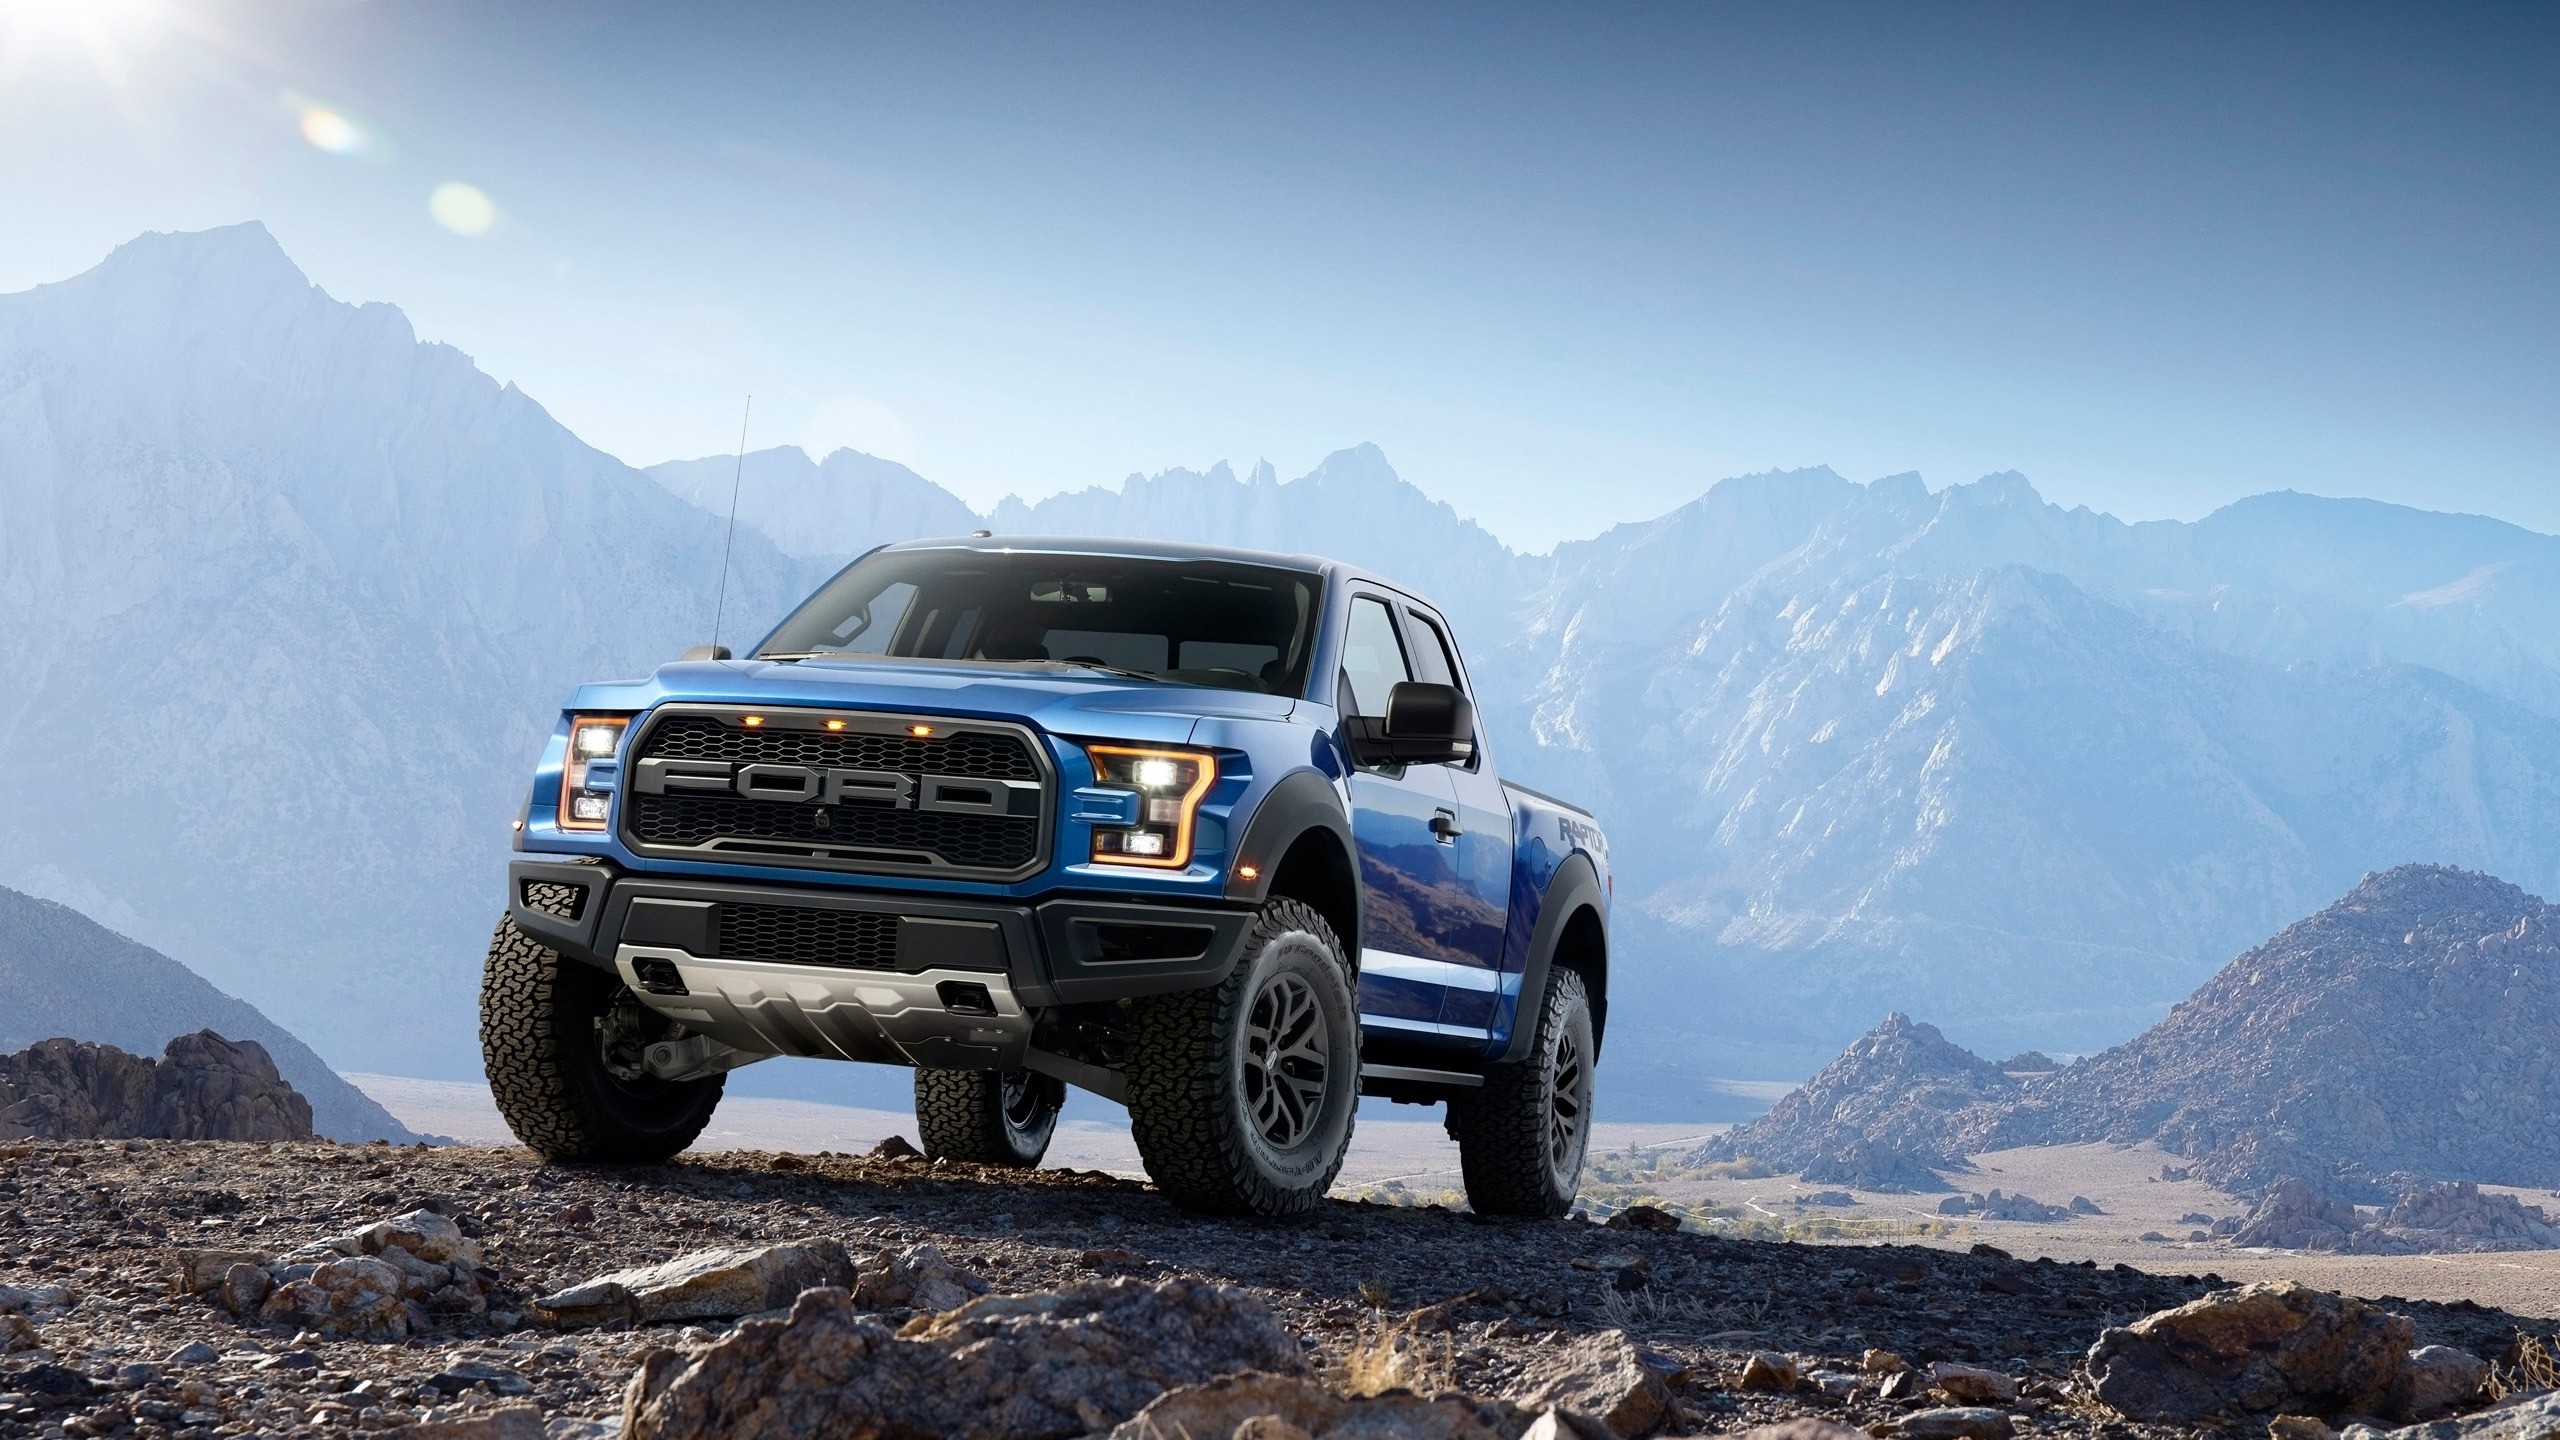 General 2560x1440 Ford car vehicle outdoors mountains blue cars Ford Raptor pickup trucks American cars